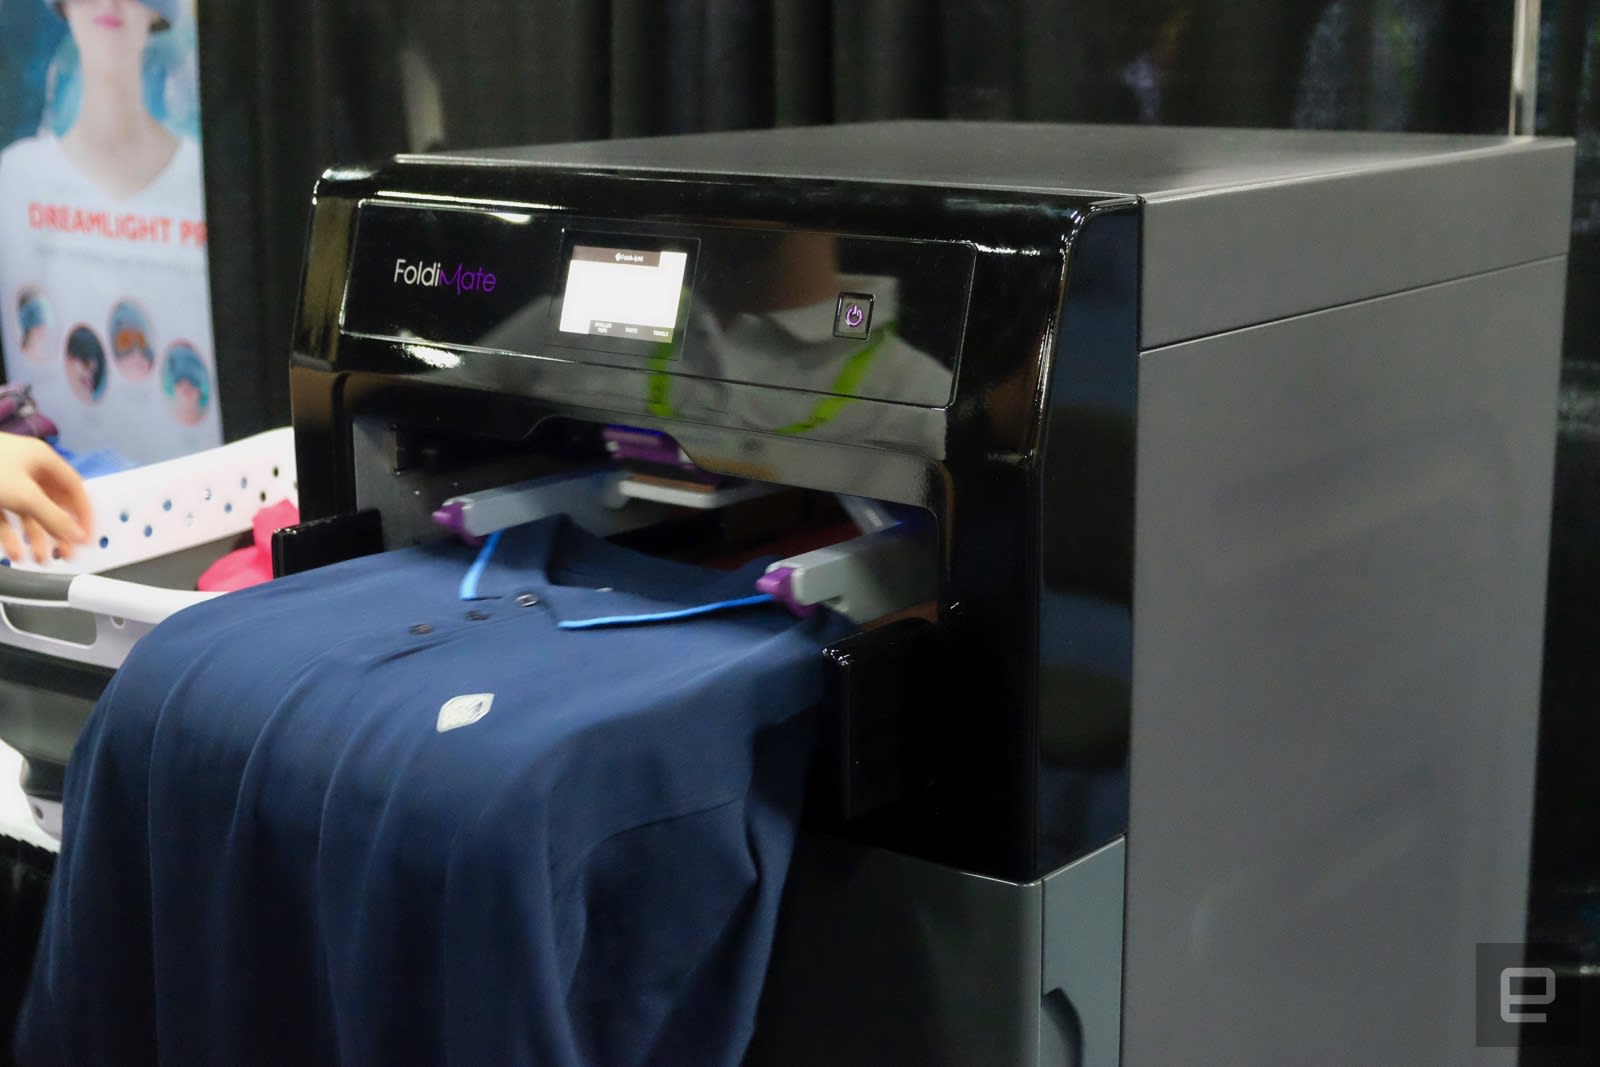 Rebelión Guinness Tormenta Watch this giant laundry-folding robot handle a stack of shirts | Engadget